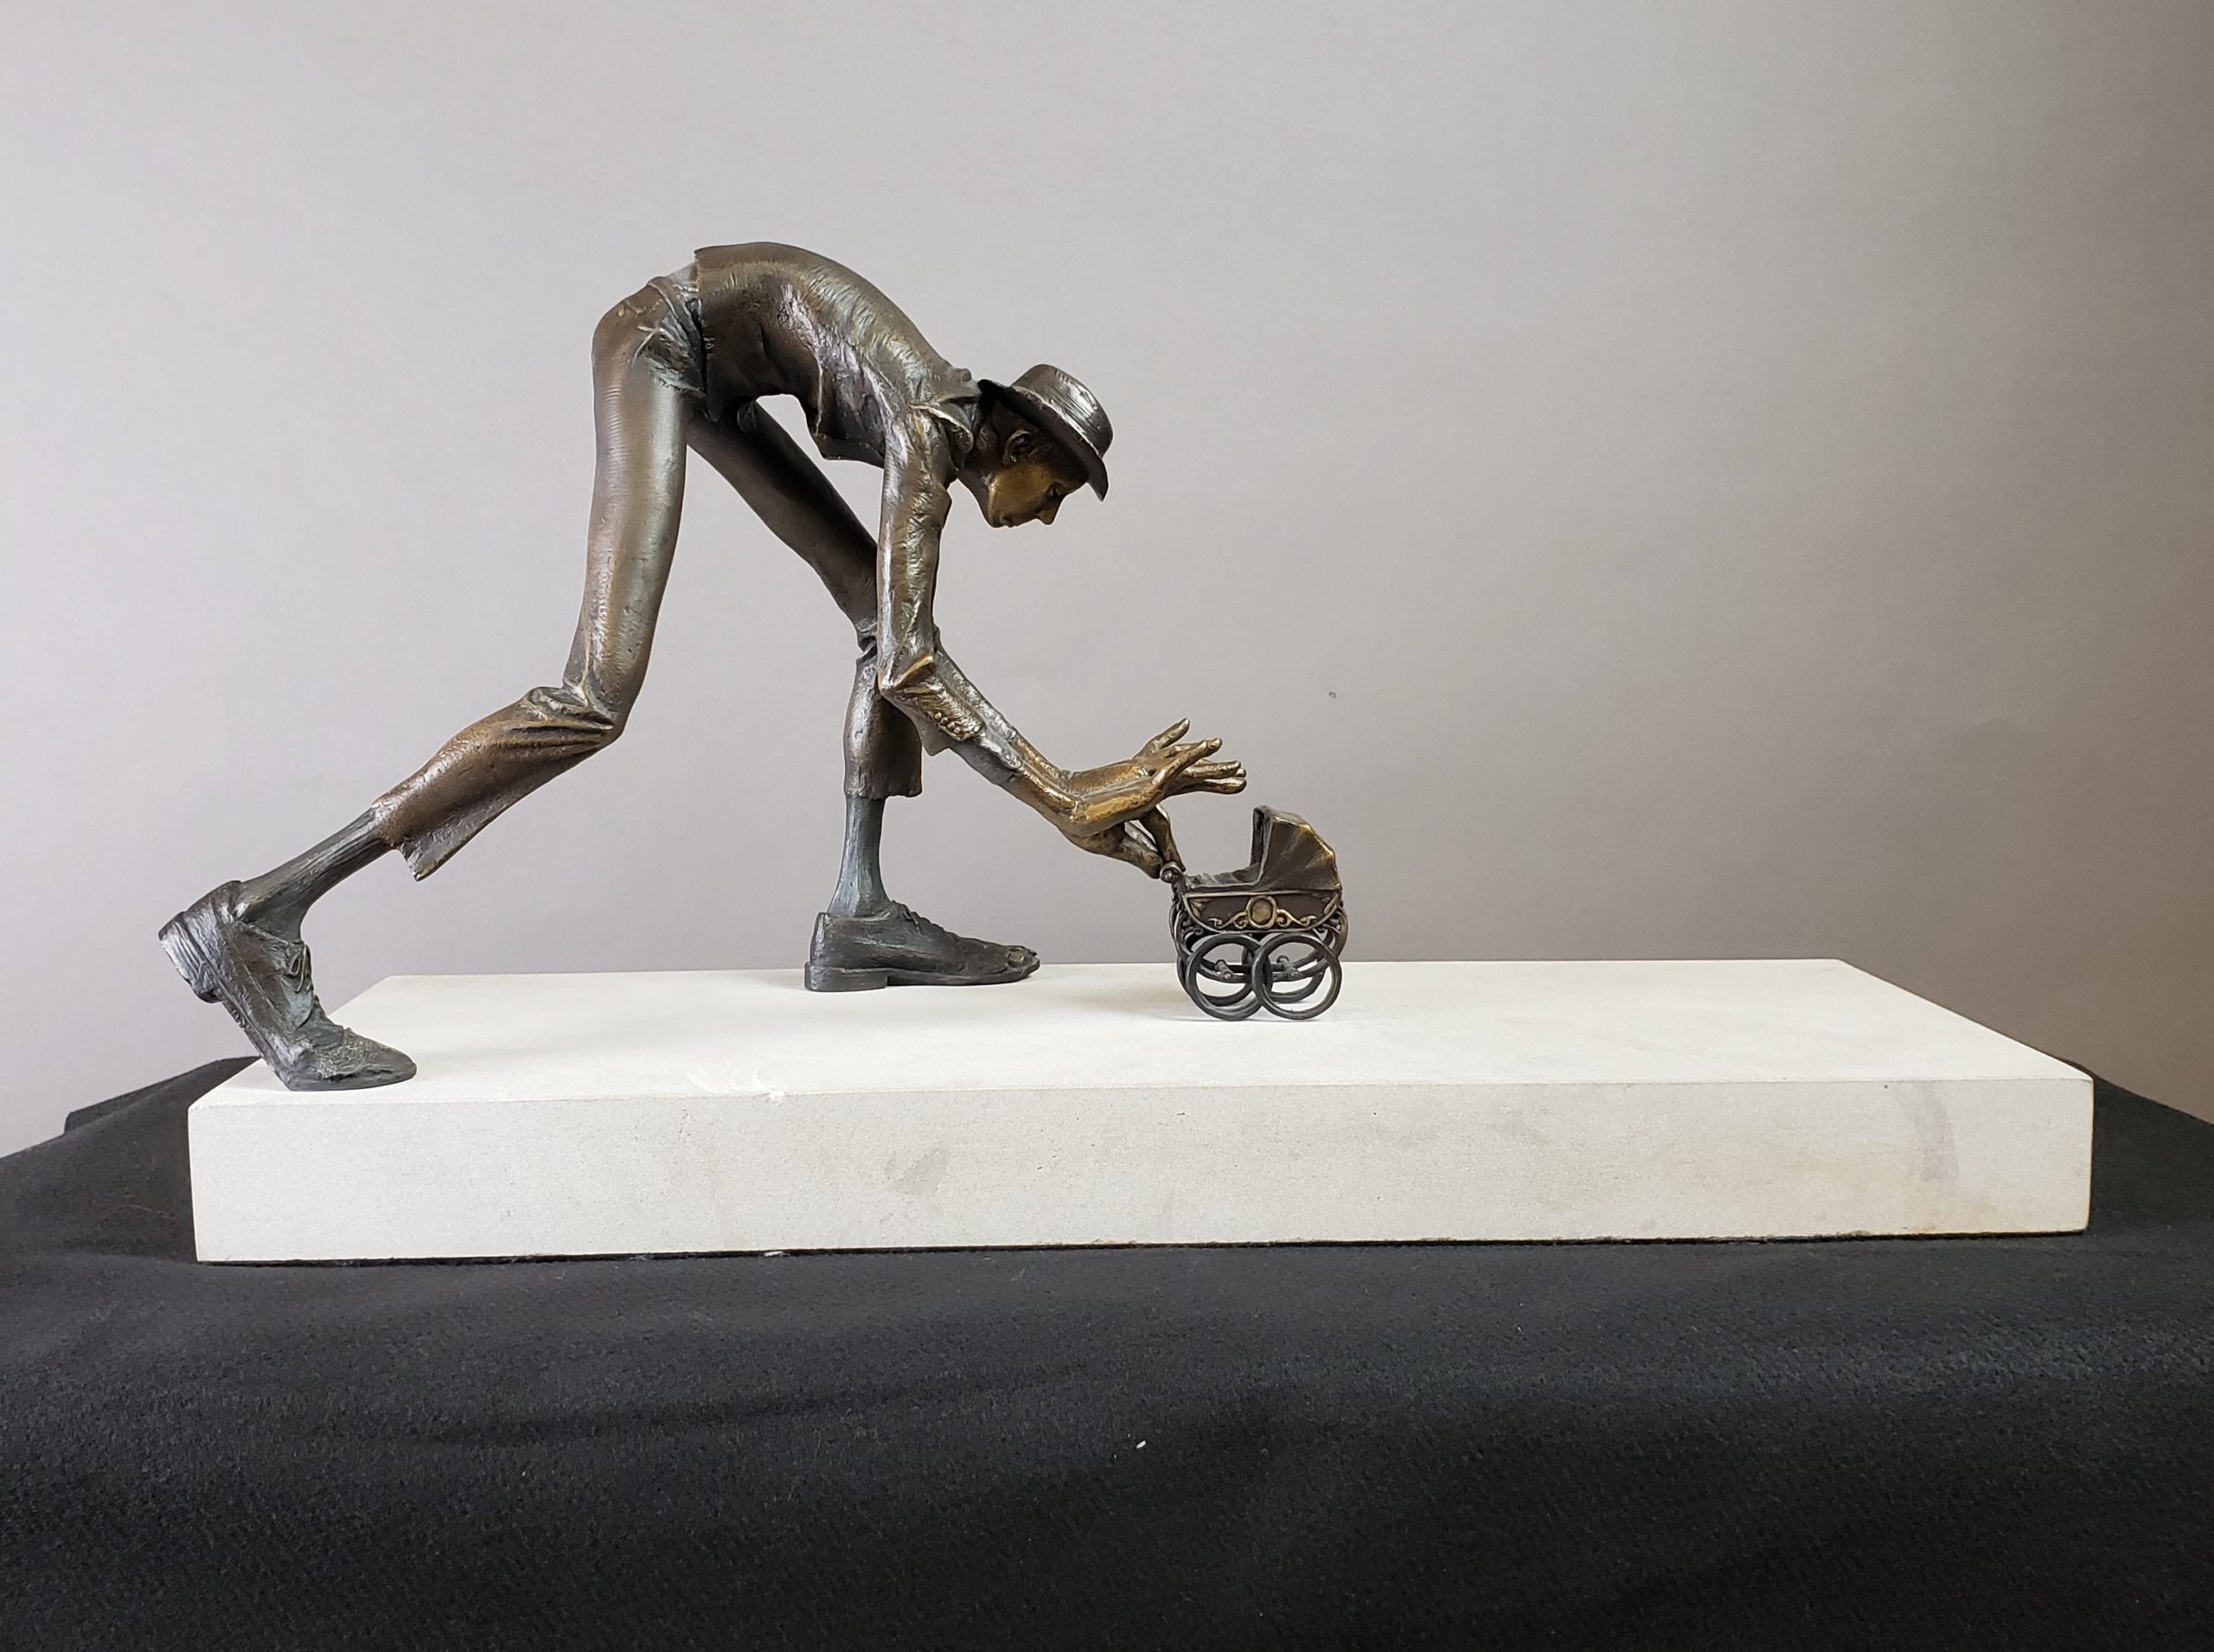 Heirloom
by Joe Palmer
Edith H. and Richman Proskauer Prize for a non-traditional sculpture — $300